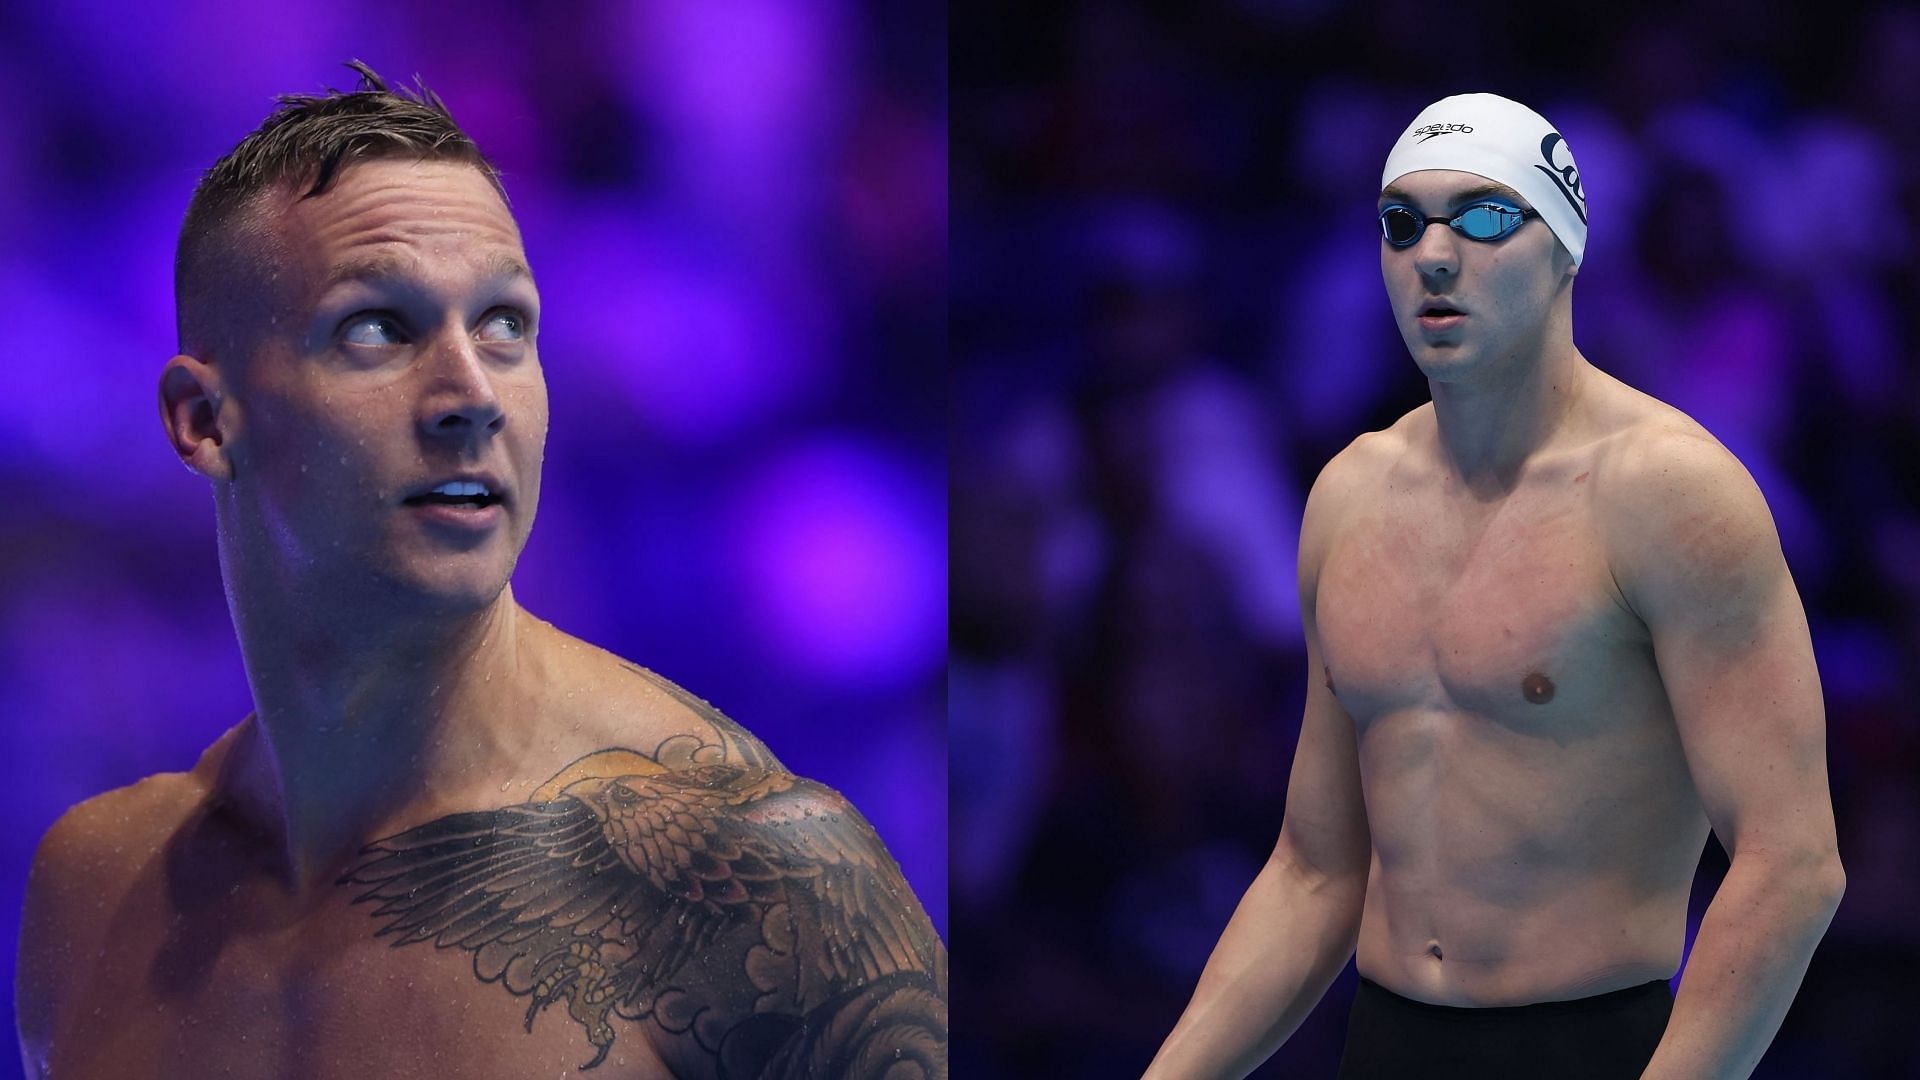 American Swimmers Caeleb Dressel and Jack Alexy